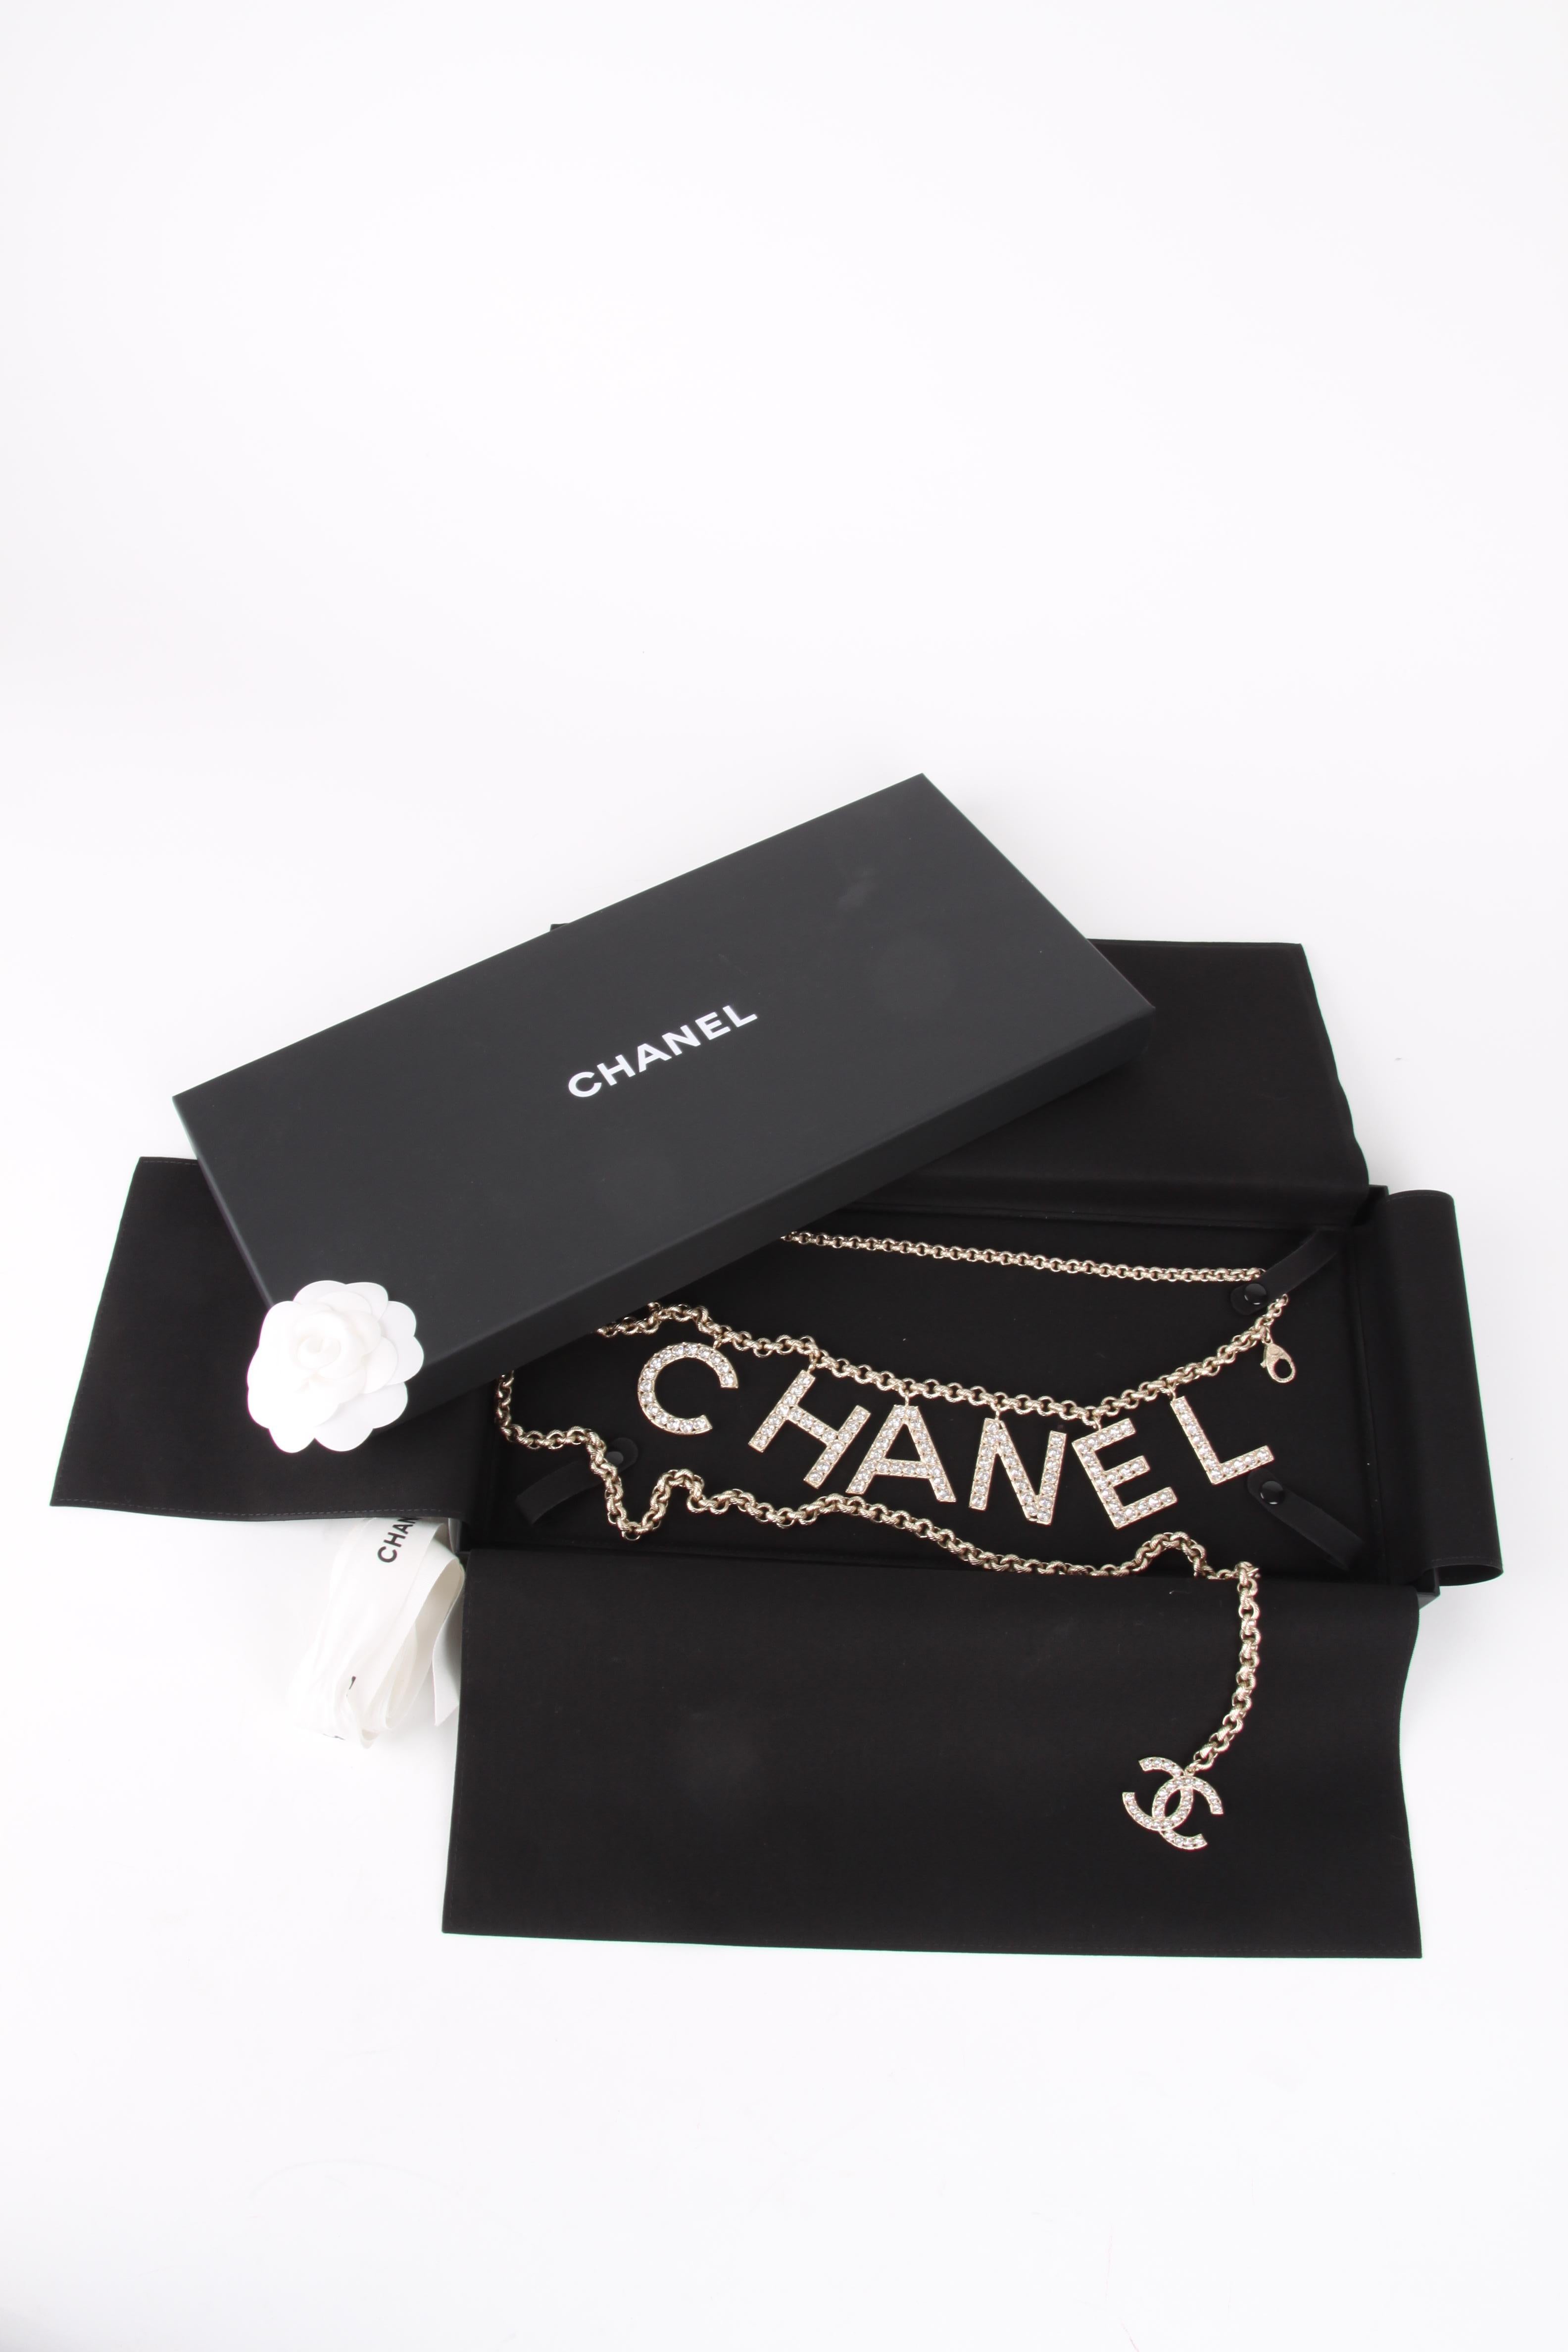 Chanel Chain Logo Belt from the Sping/Summer Collection Of 2019.

SOLD OUT WORLD WIDE.

This stylish belt is a gold tone chain with crystal CHANEL letters and a Chanel CC at the end with the timeless quality and style only from Chanel! Most sought